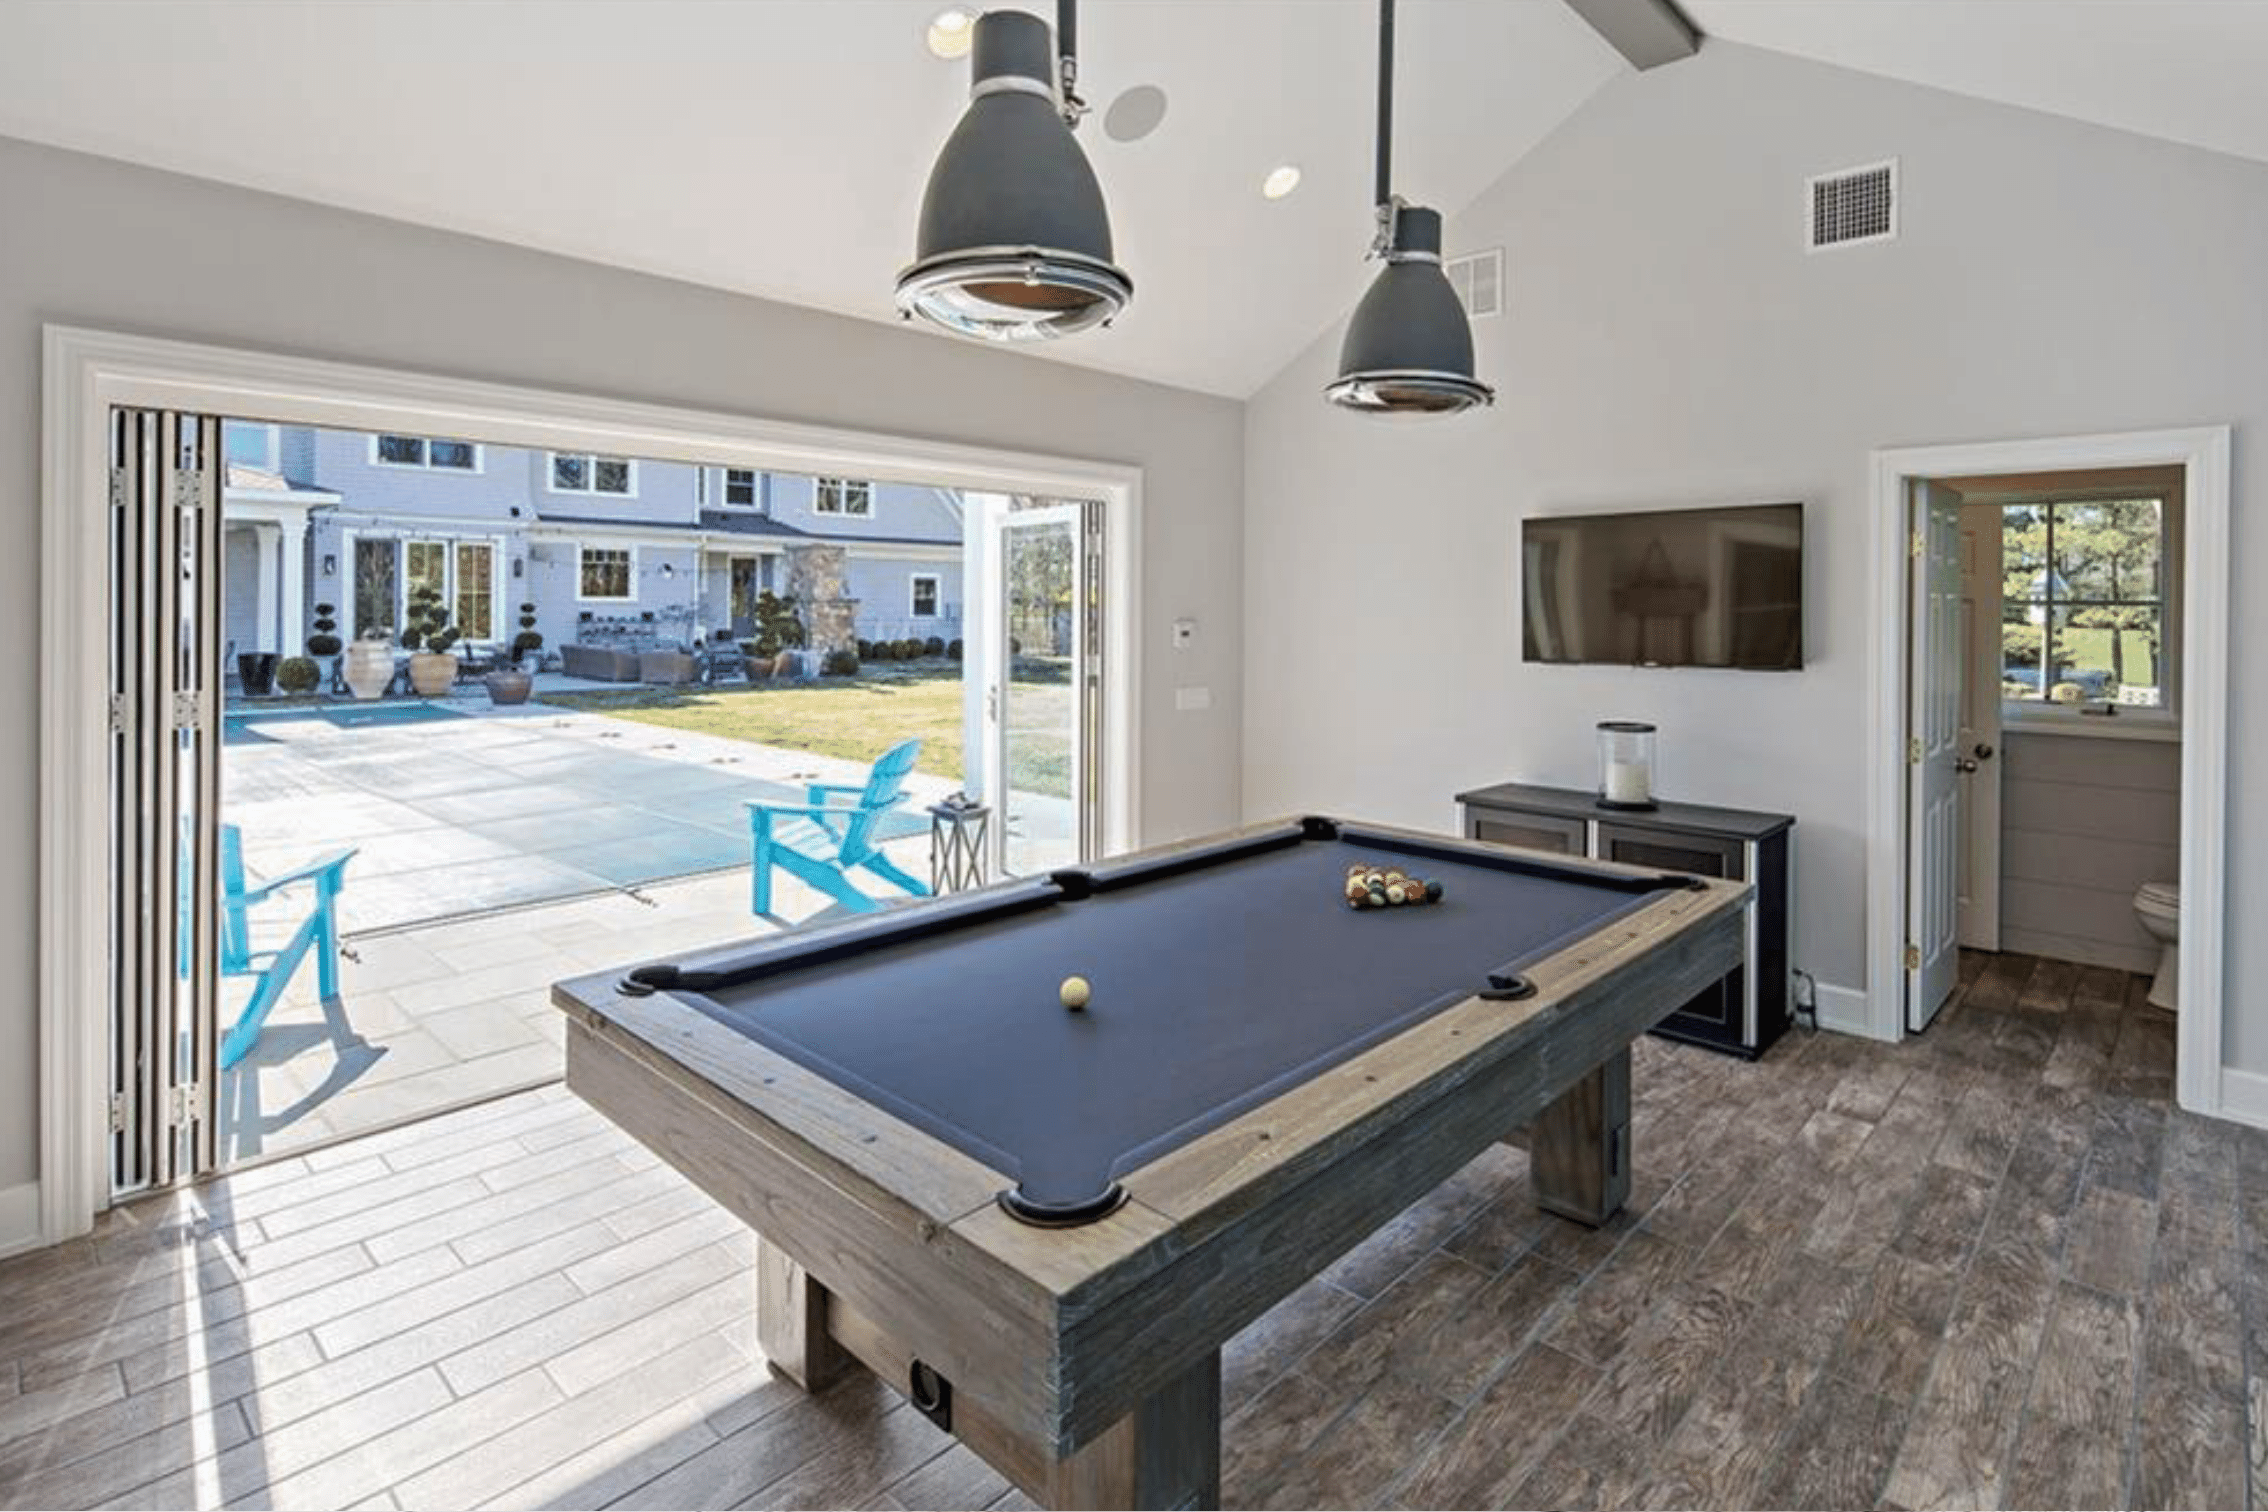 Indoor Pool Table in Pool House